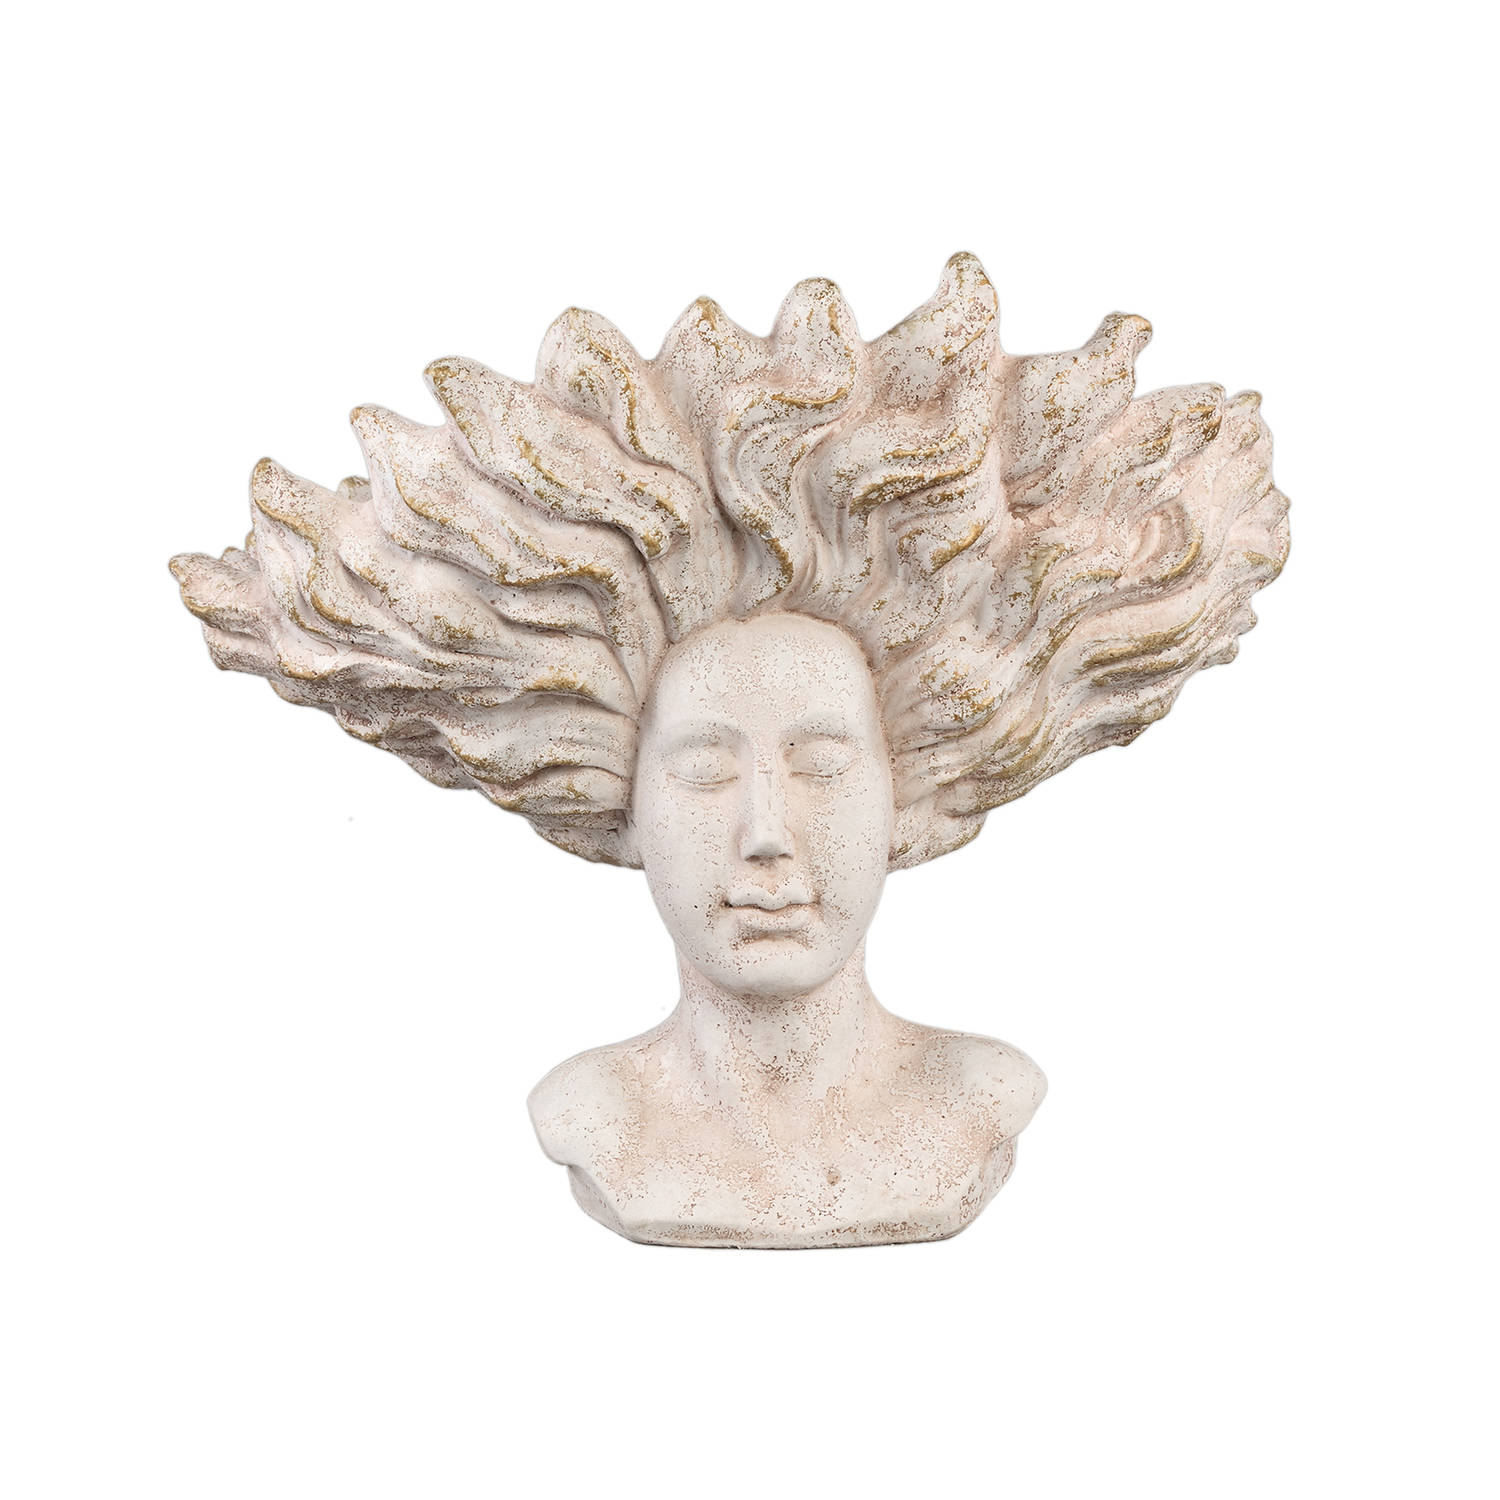 PTMD Kimbere Cream cement face shaped statue hair L